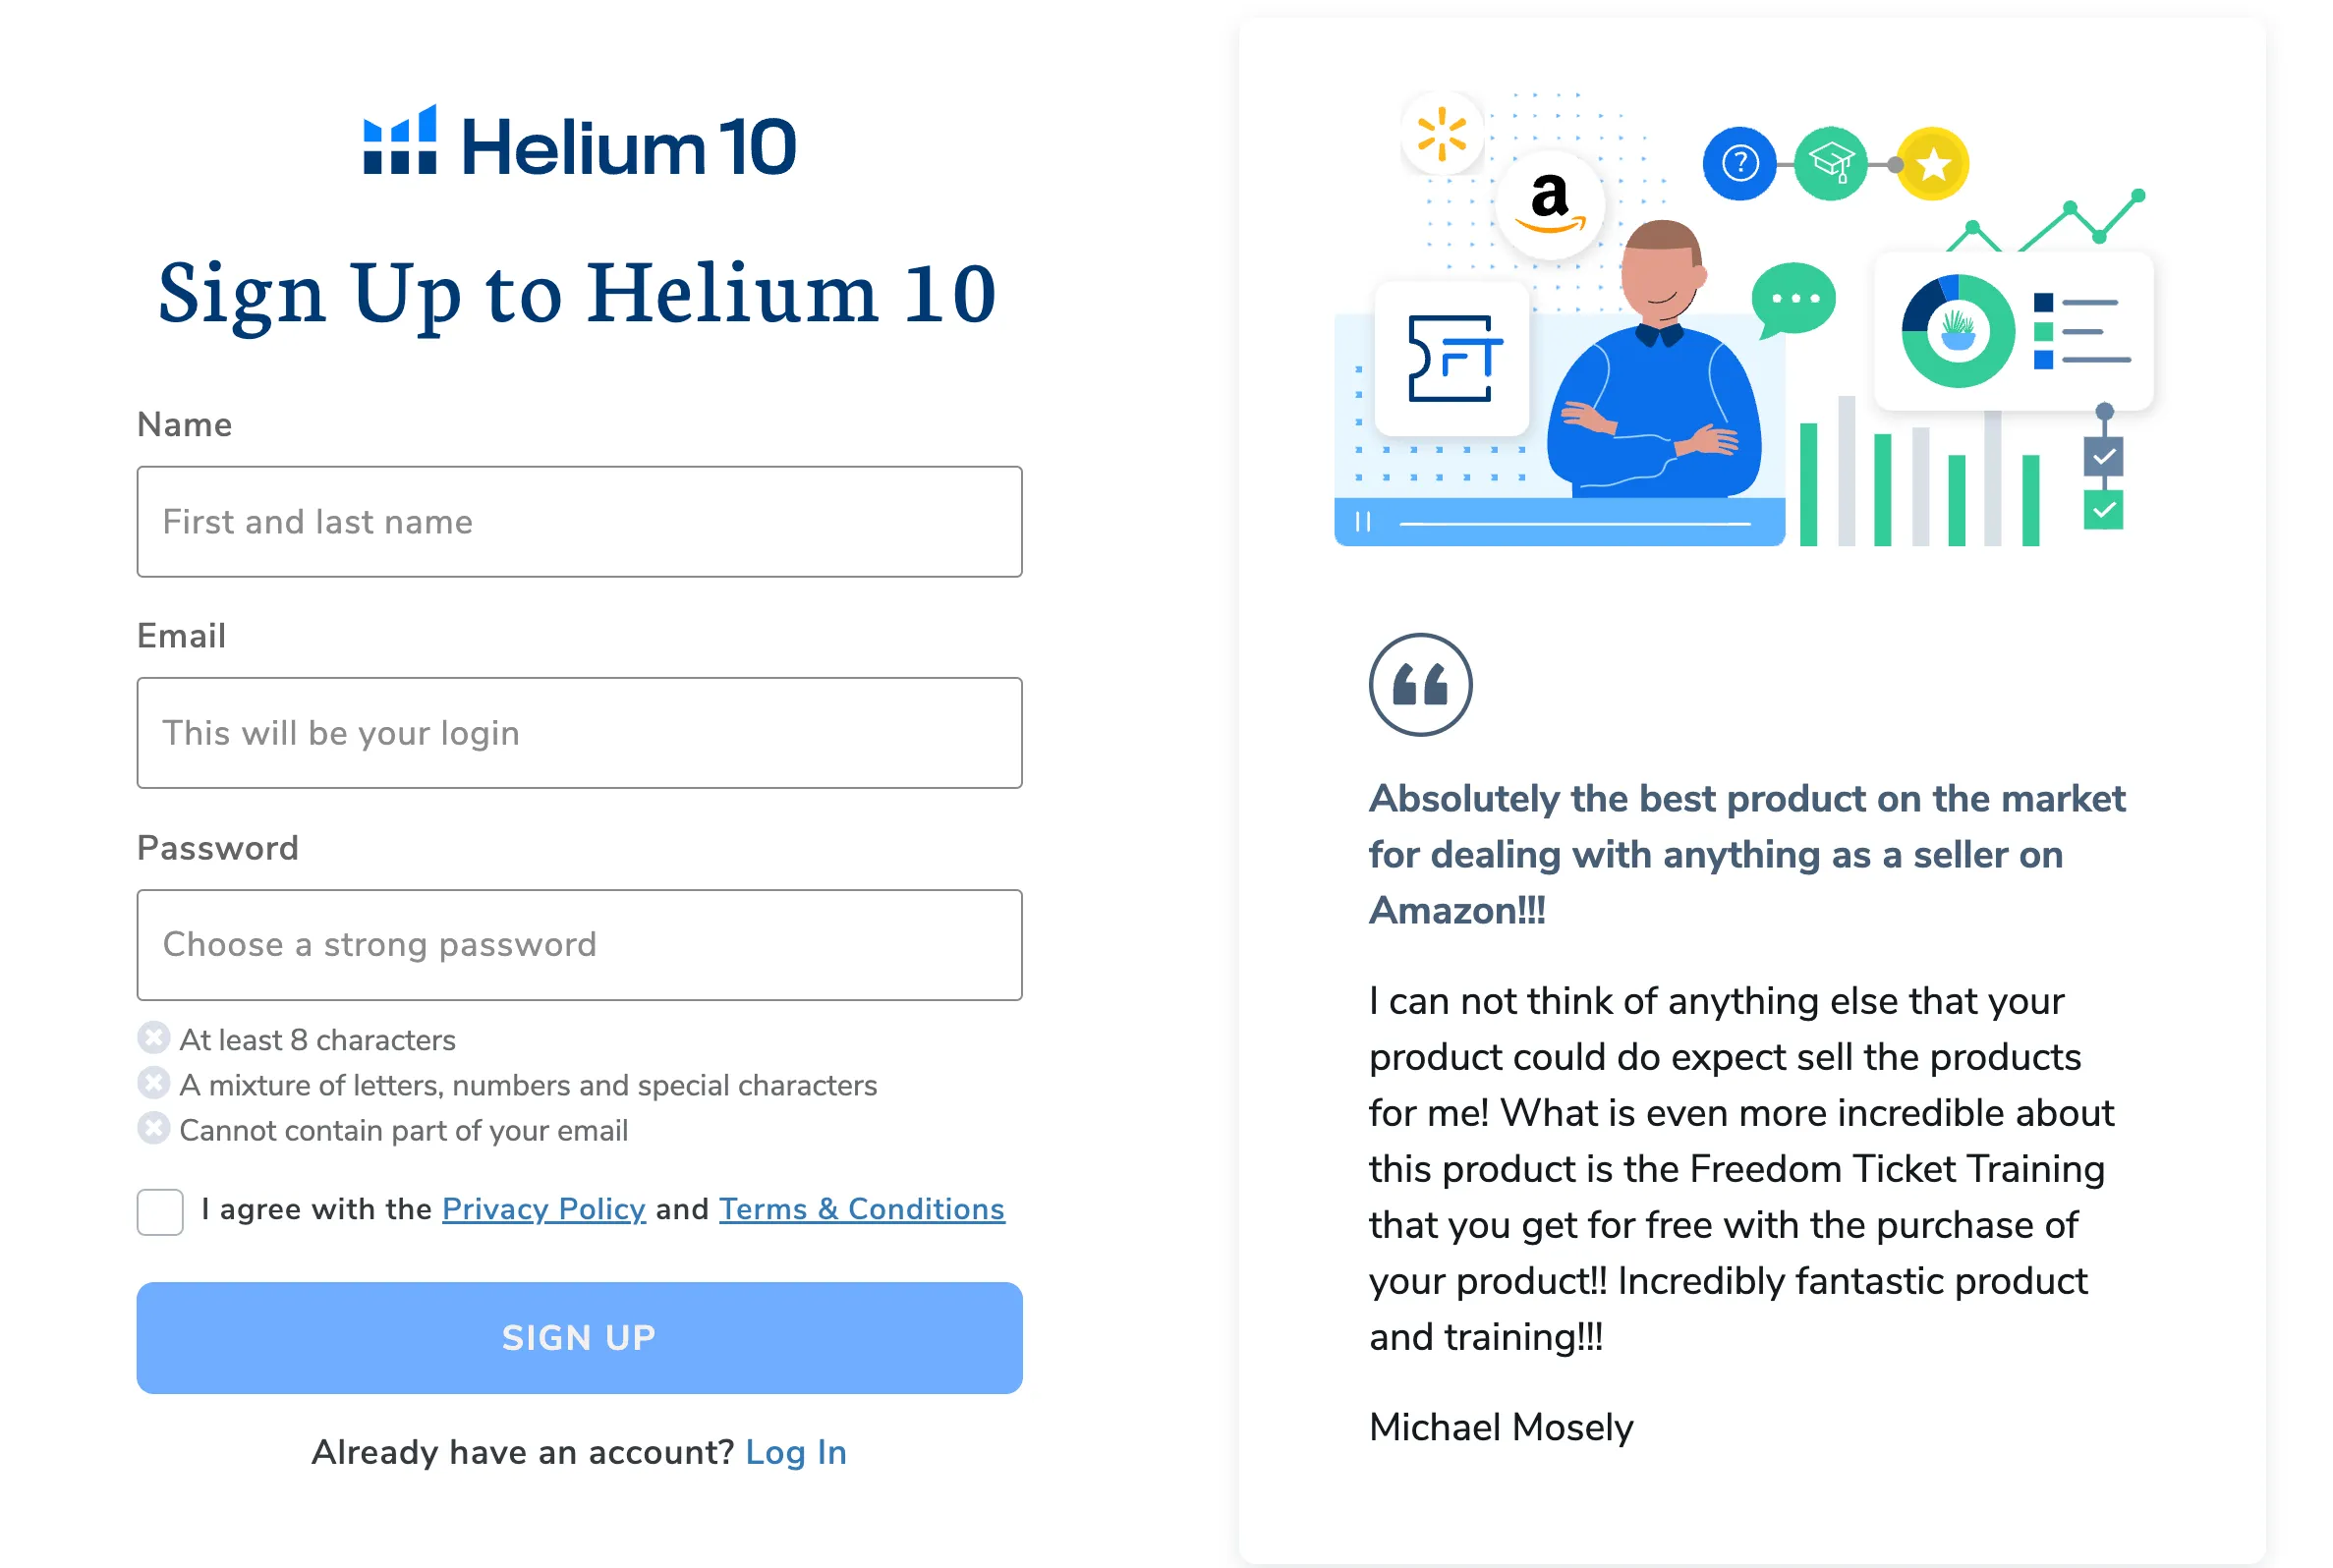 Sign-Up-to-Helium-10